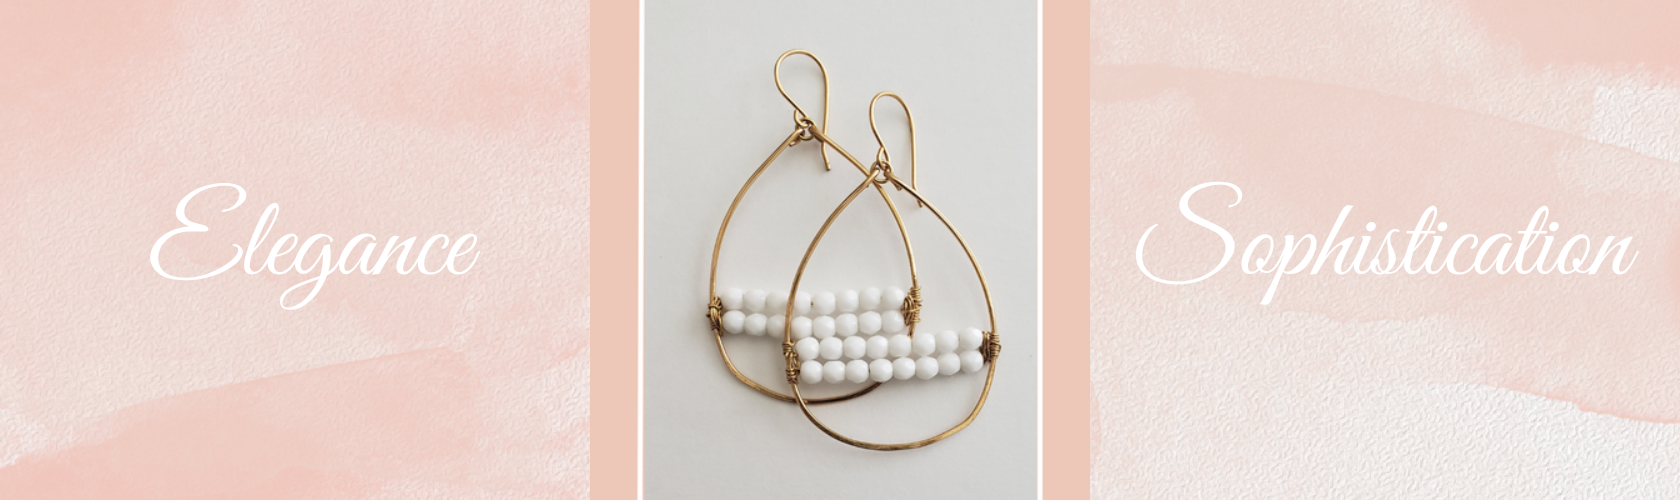 Elegant White Wire-wrapped Hoops that can be purchased at http://gemdesignsllc.com